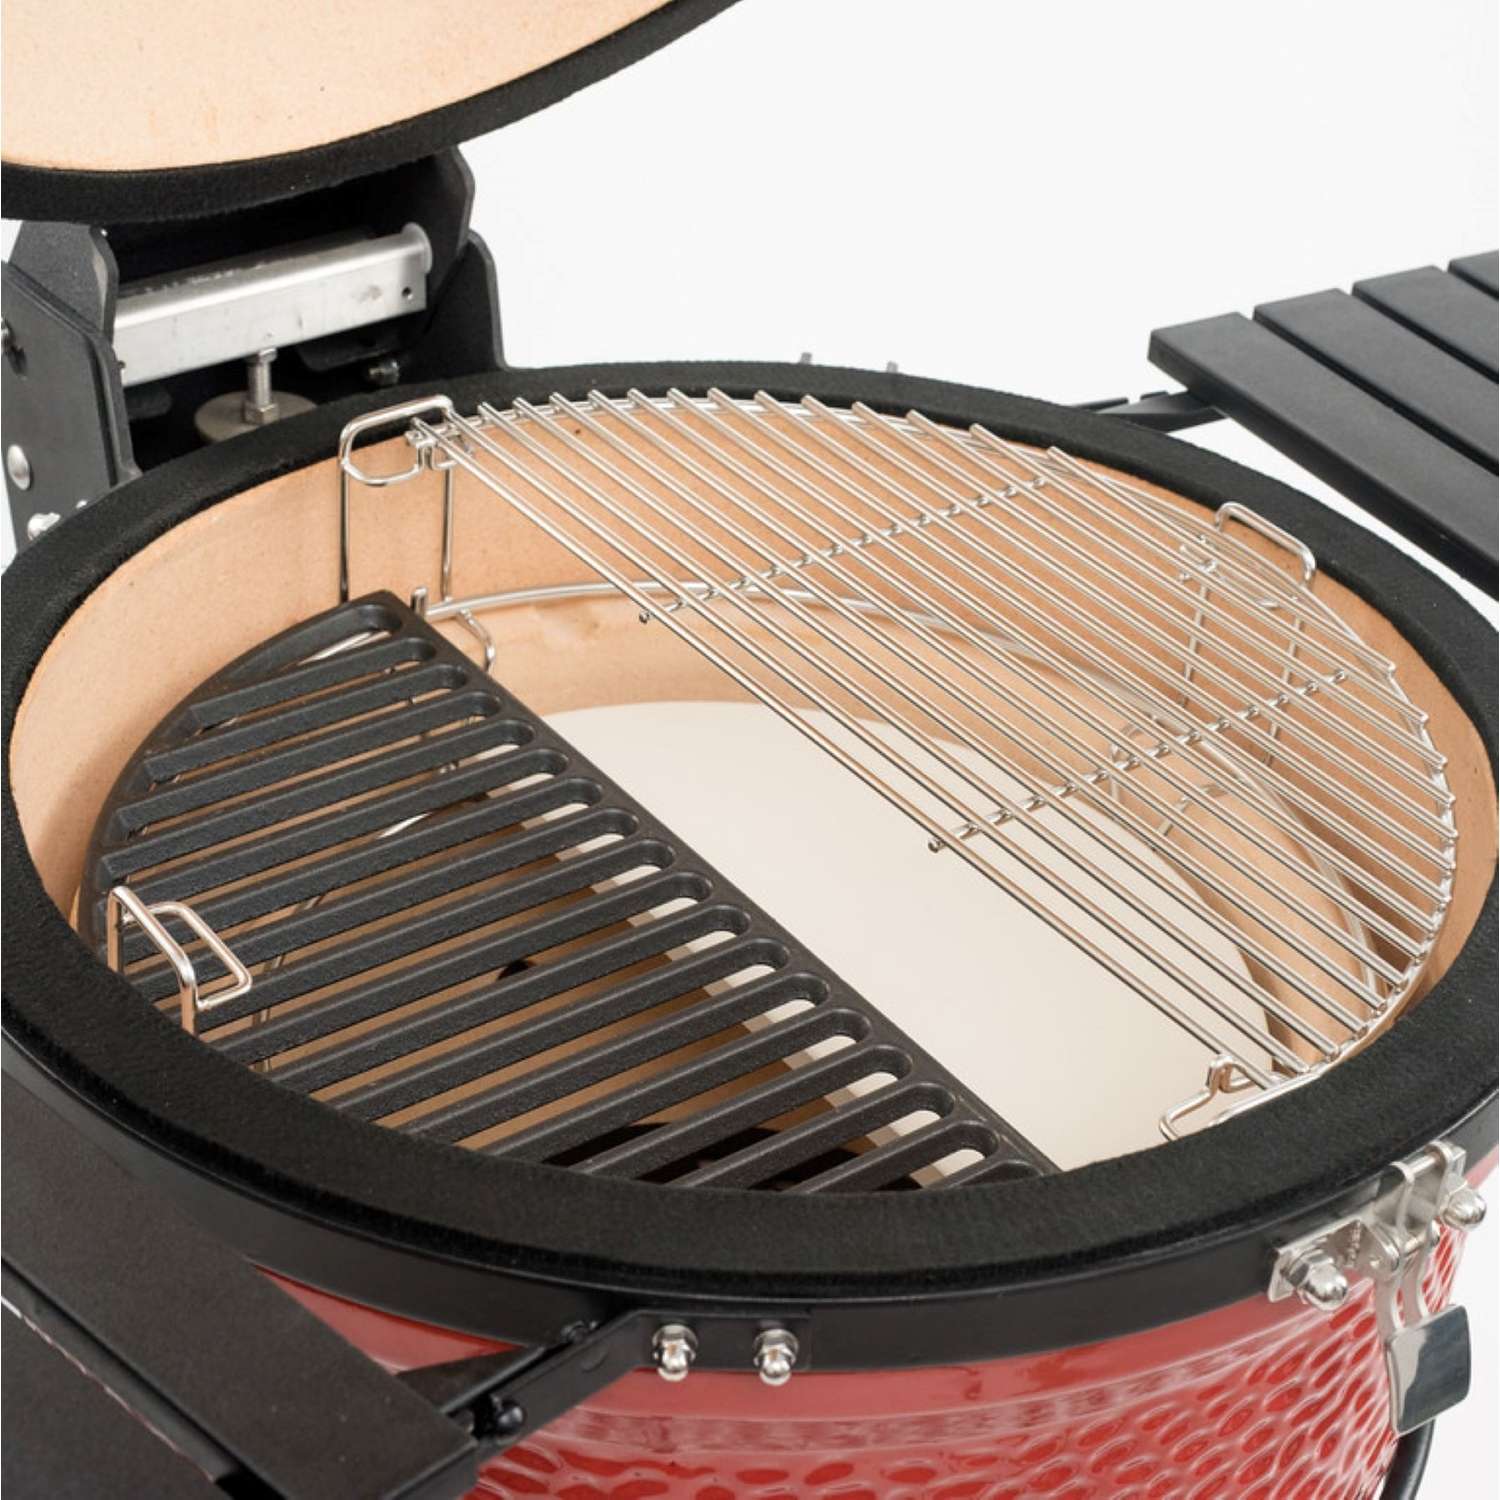 Hanover Ceramic Kamado Grill with Stainless Steel Cart and